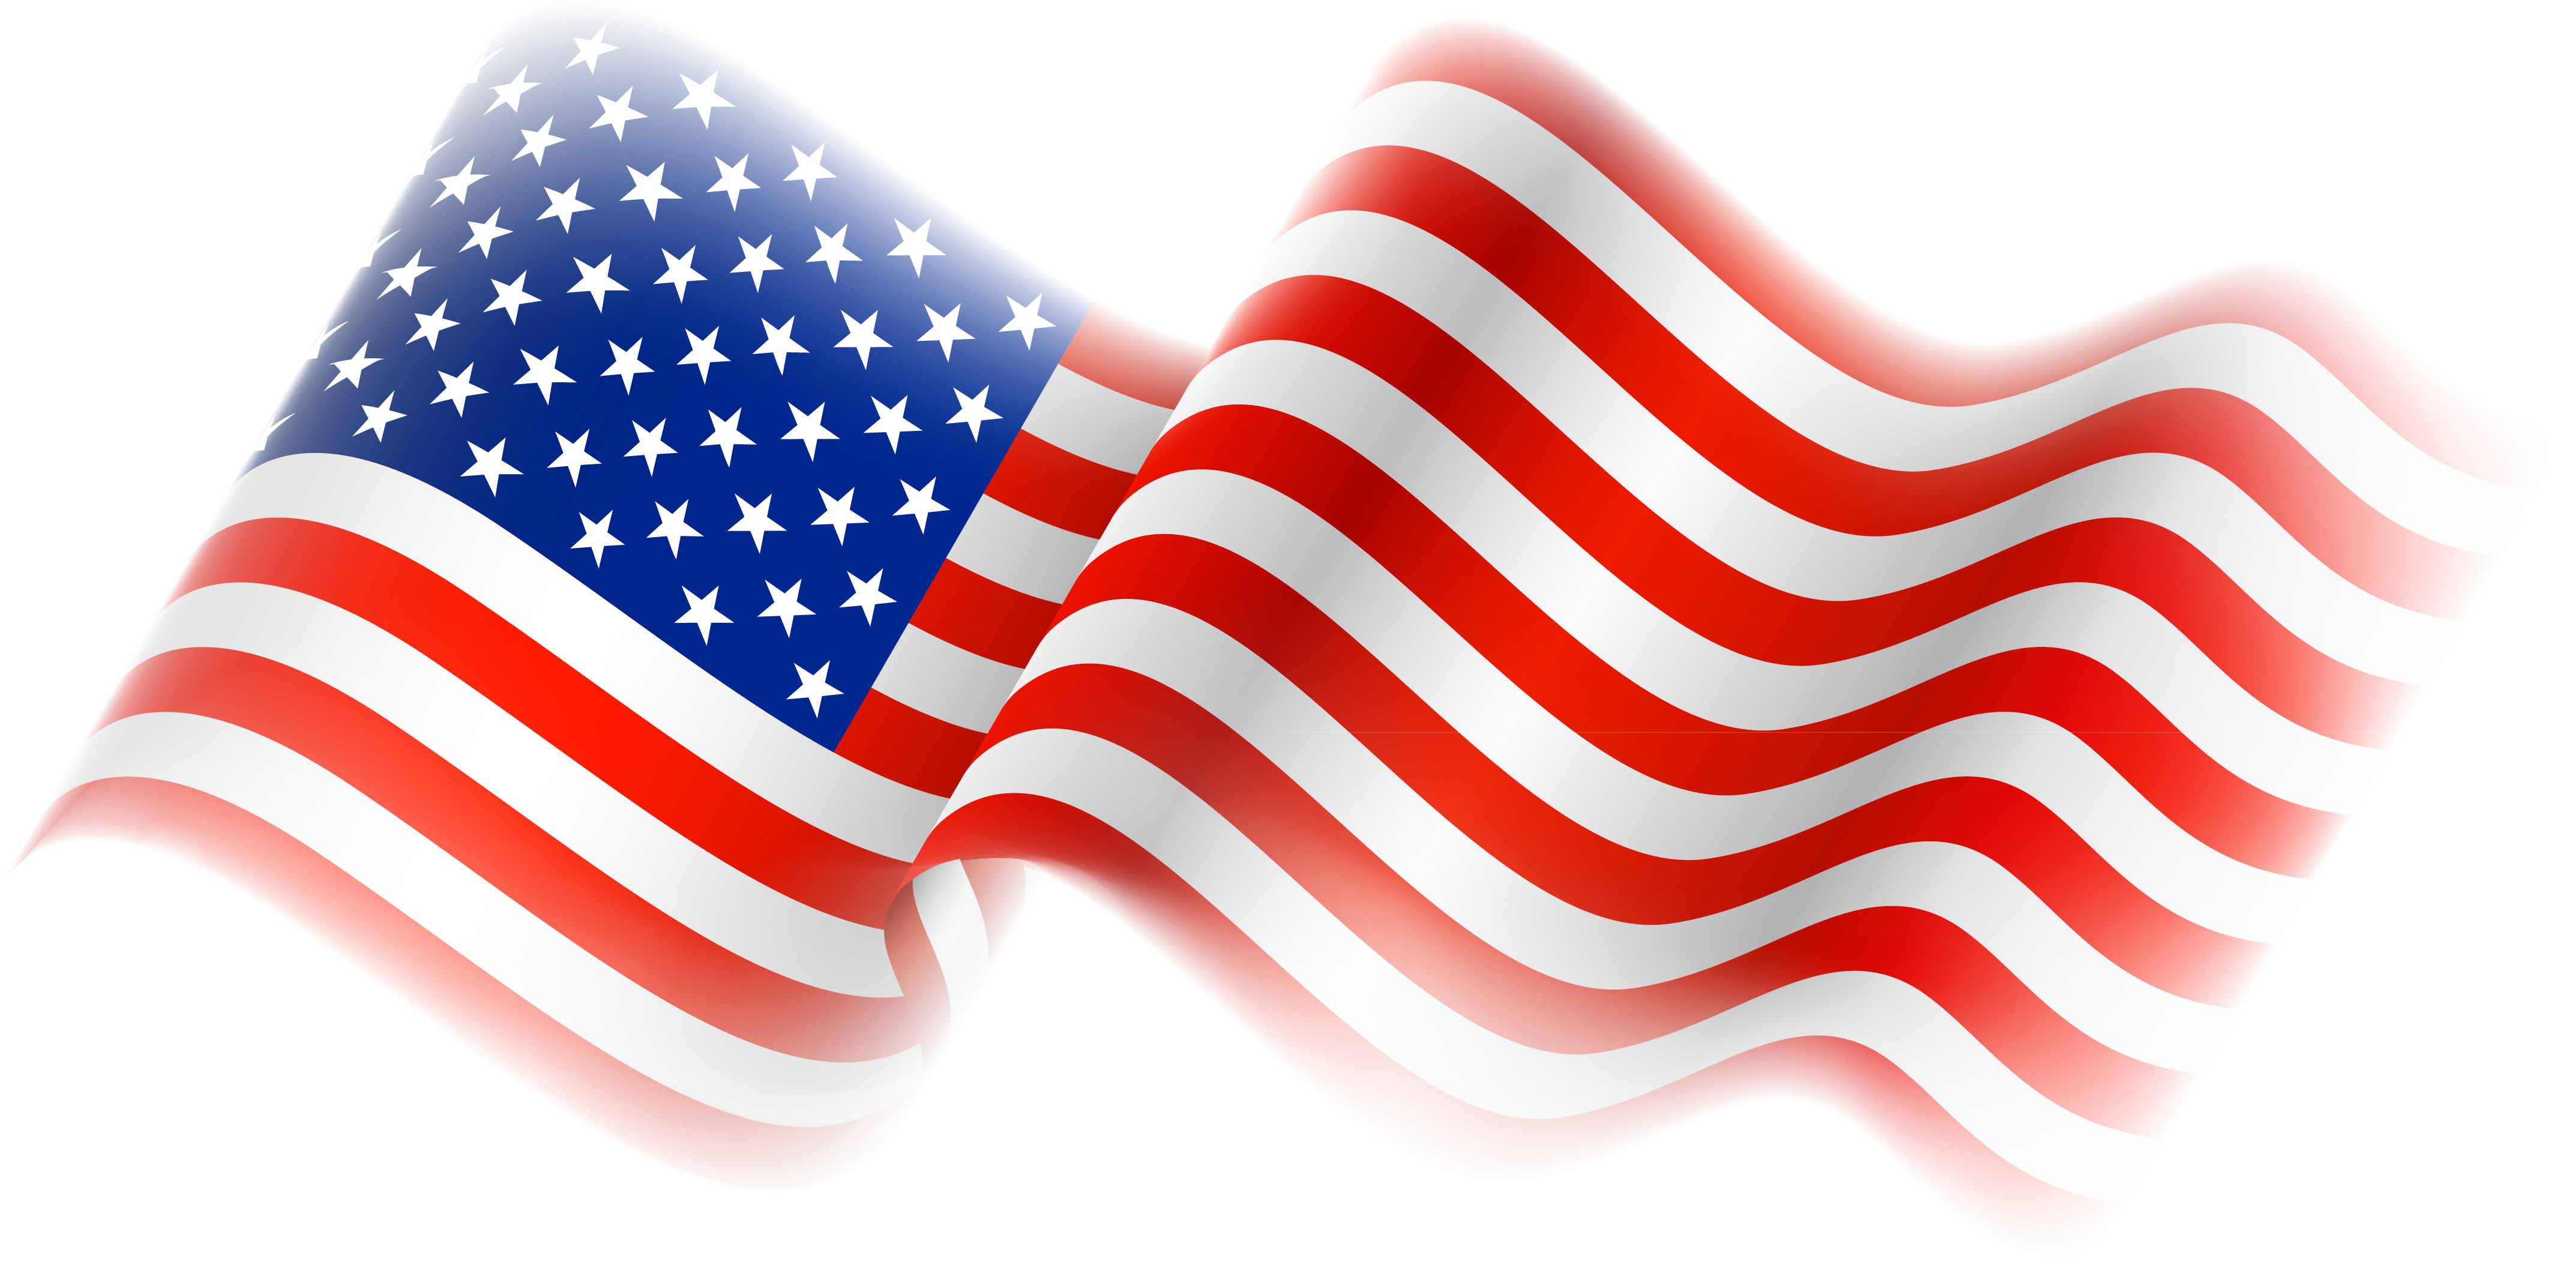 American flag clipart no background free